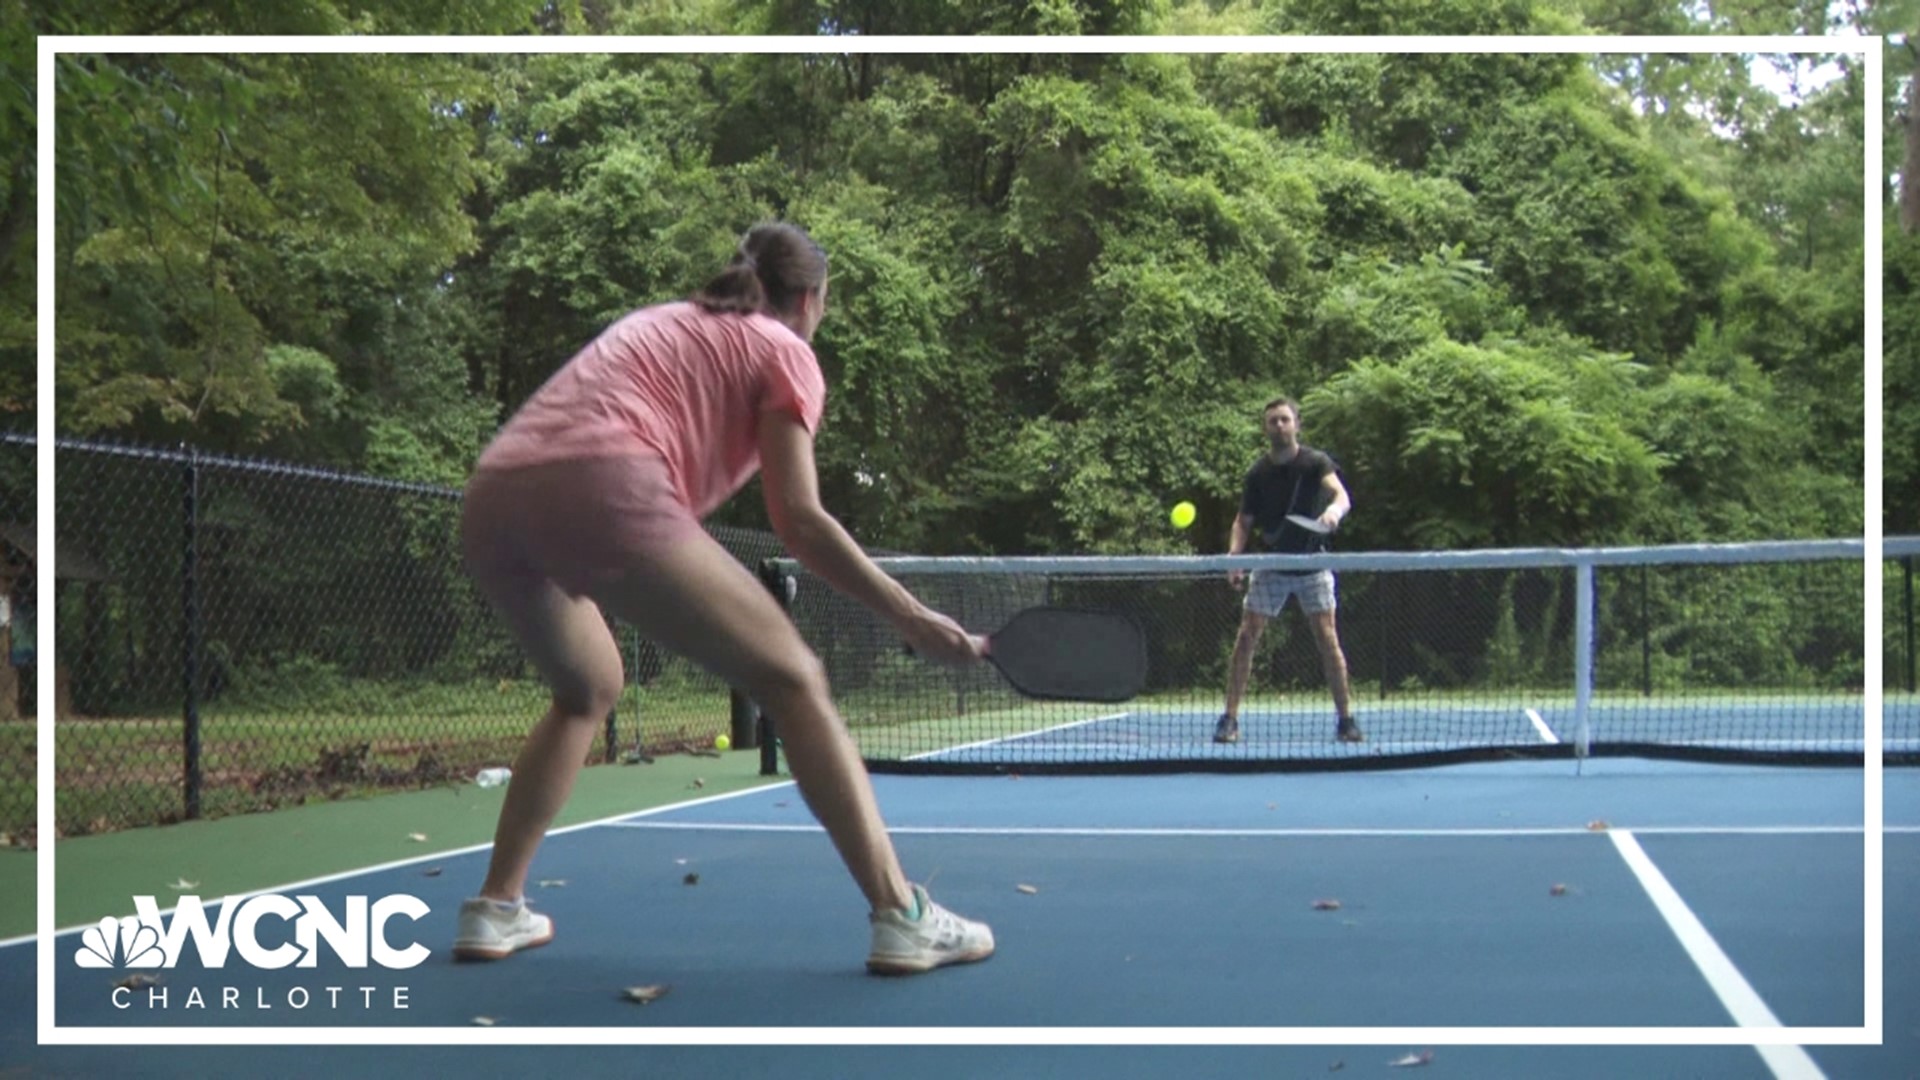 Mecklenburg County leaders are set to hear plans on the controversy over the basketball and pickleball courts in Sheffield Park.